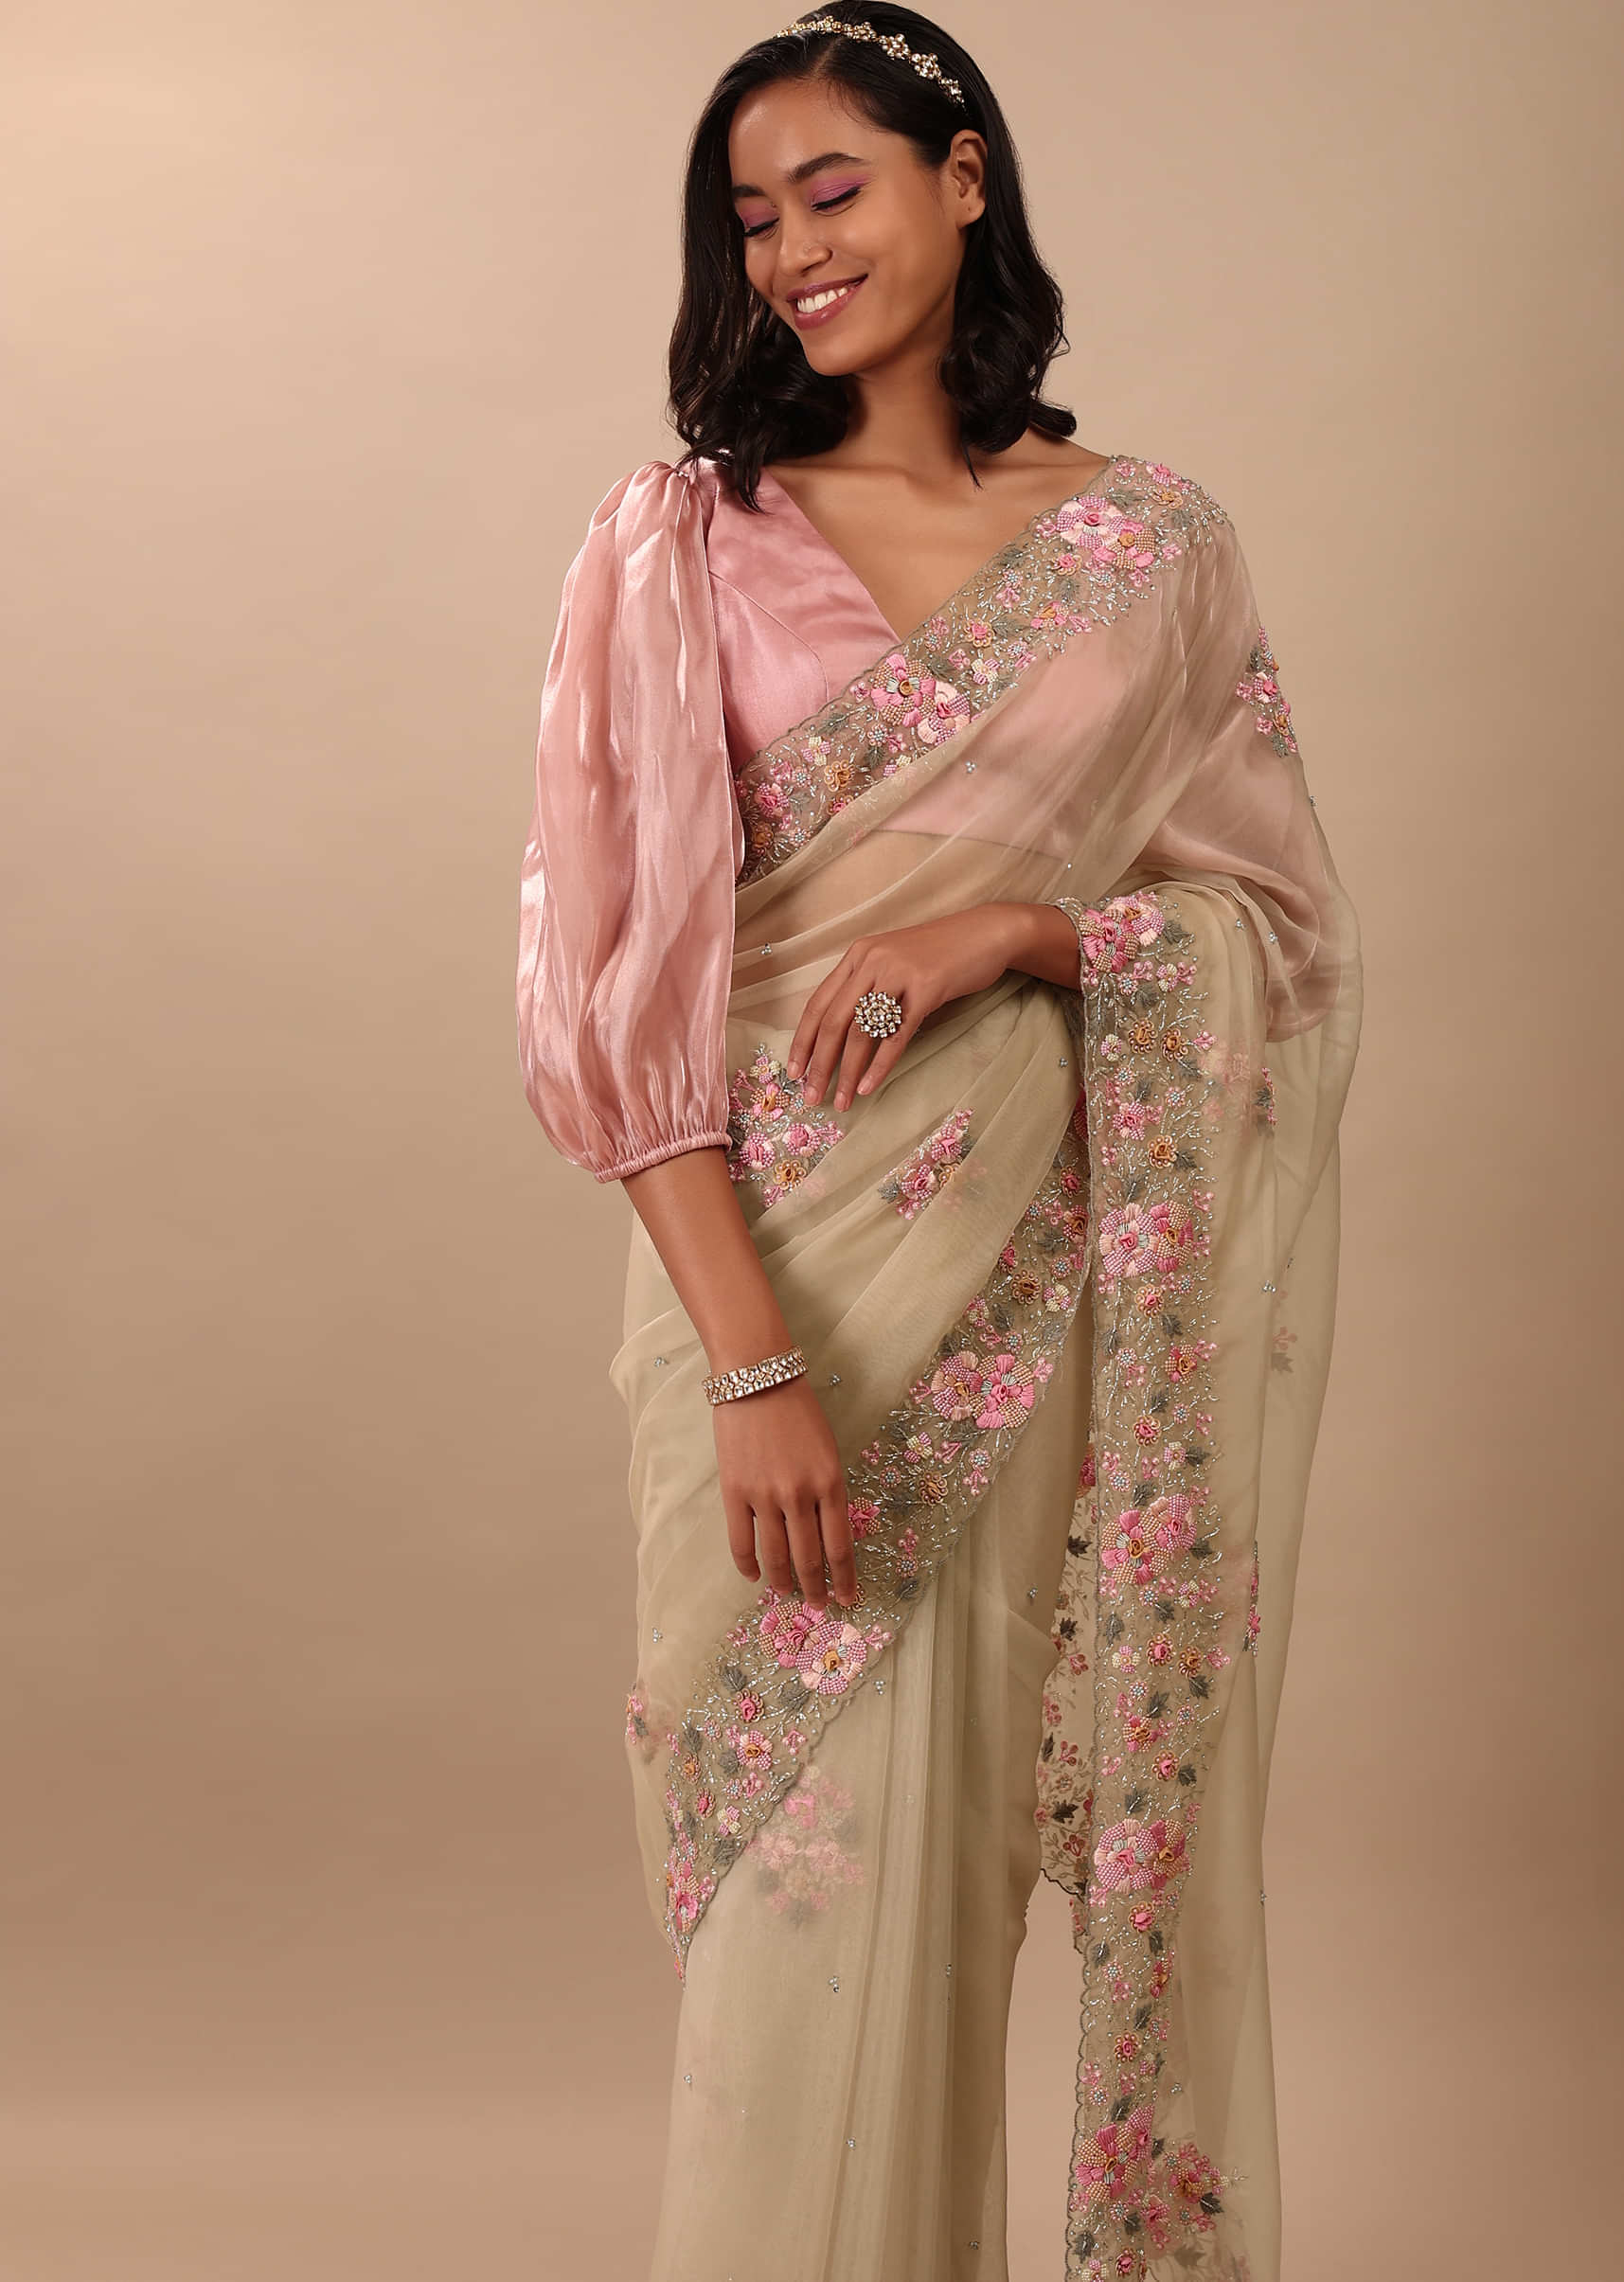 Beige White Saree In Organza Fabric And Floral Embroidery With Cut Dana & Moti